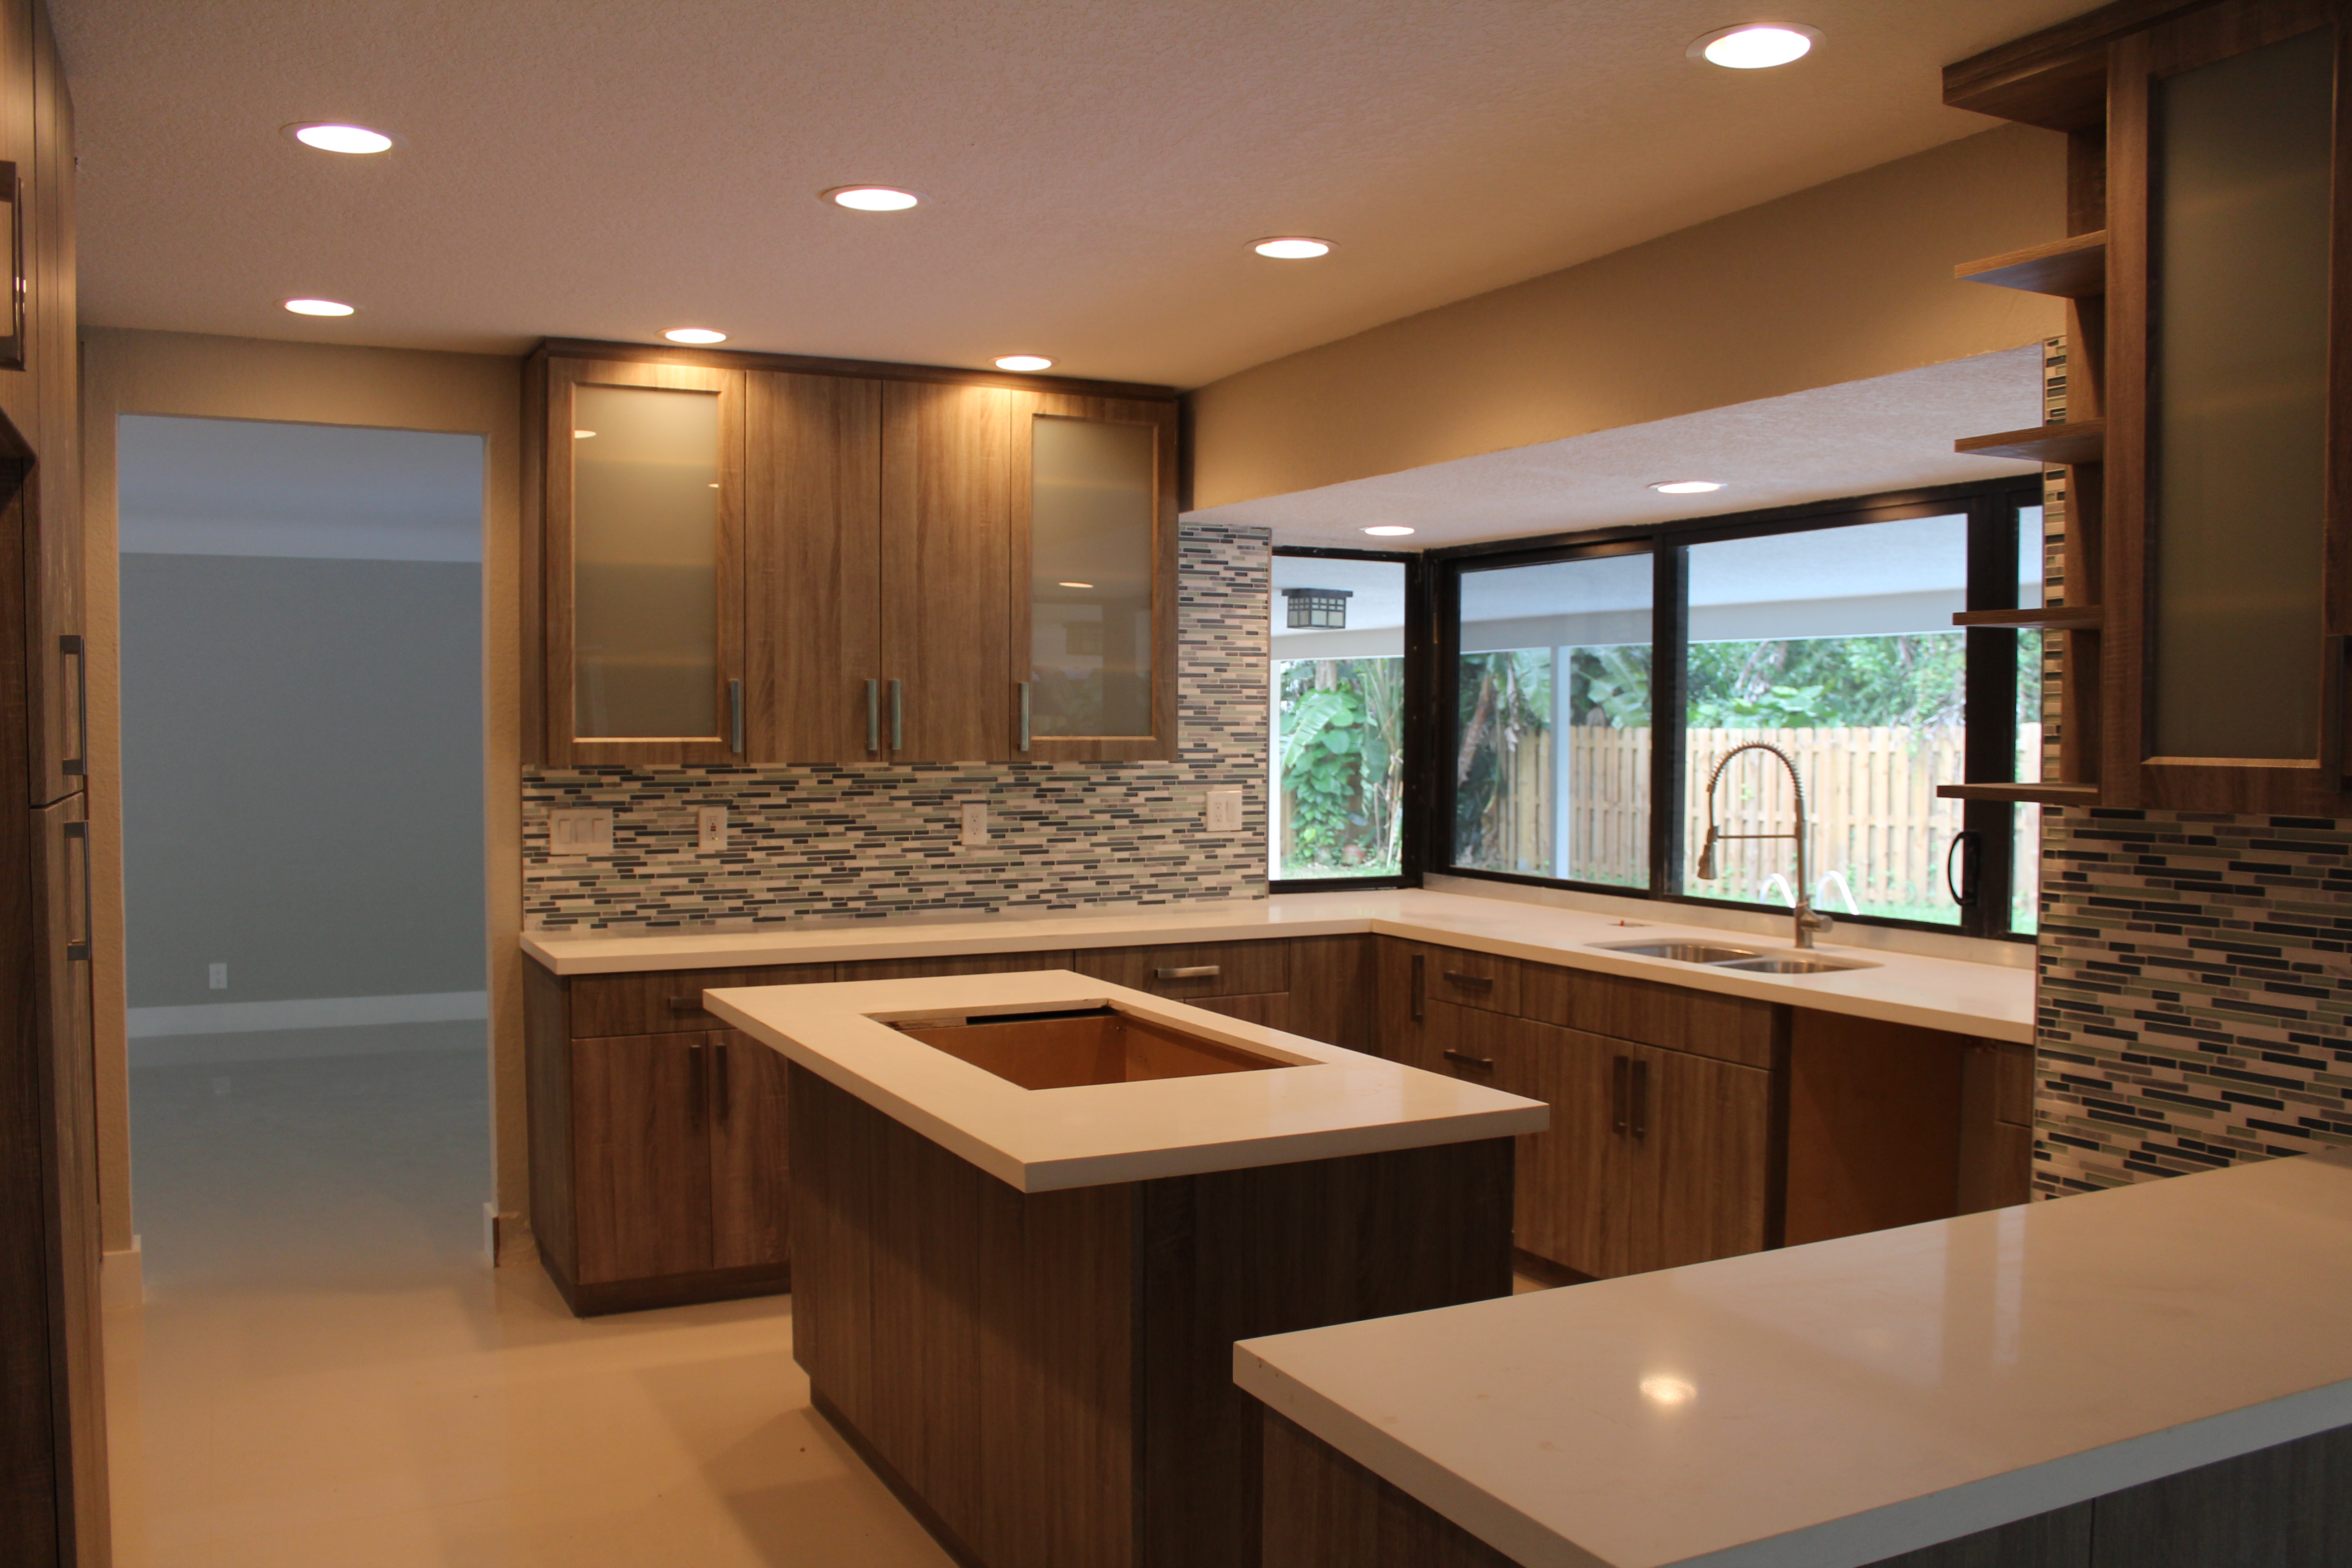 How to Plan Your Next Kitchen Remodeling Project